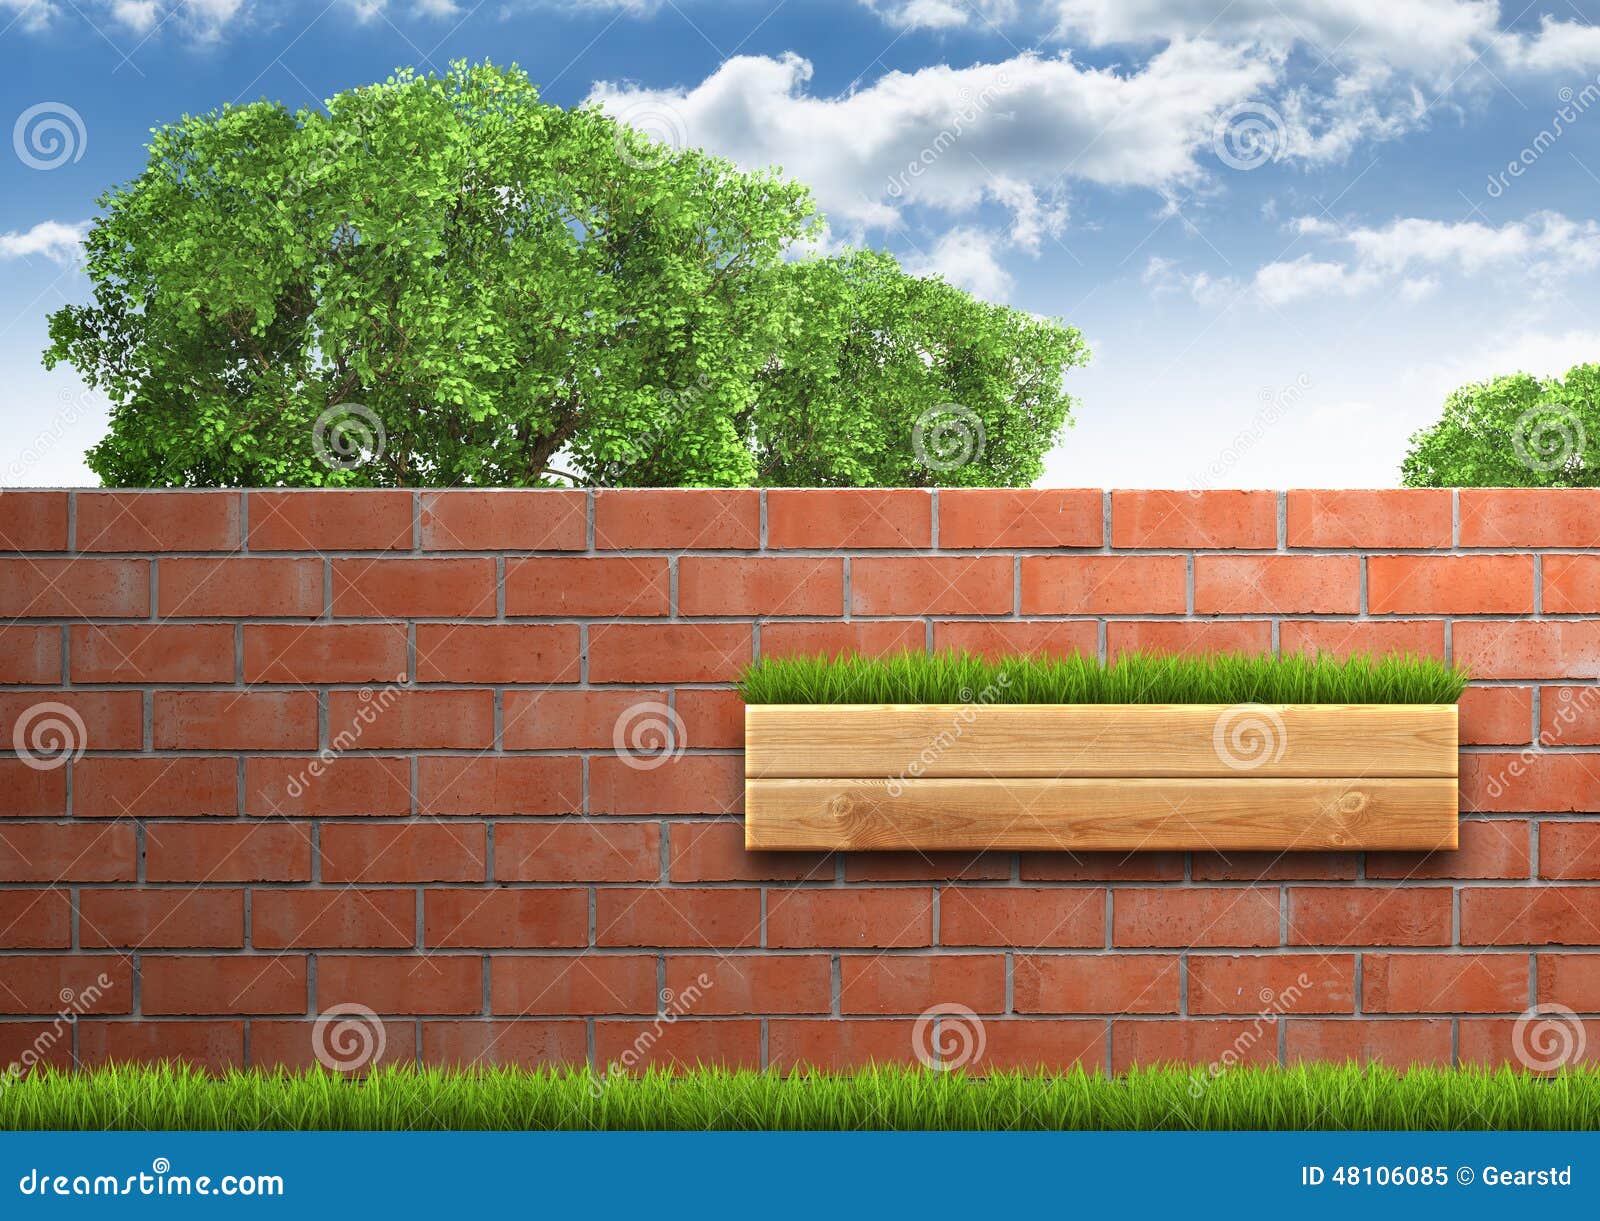 Grown Tree With Brick Wall On Green Fresh Grass Stock Image Image Of